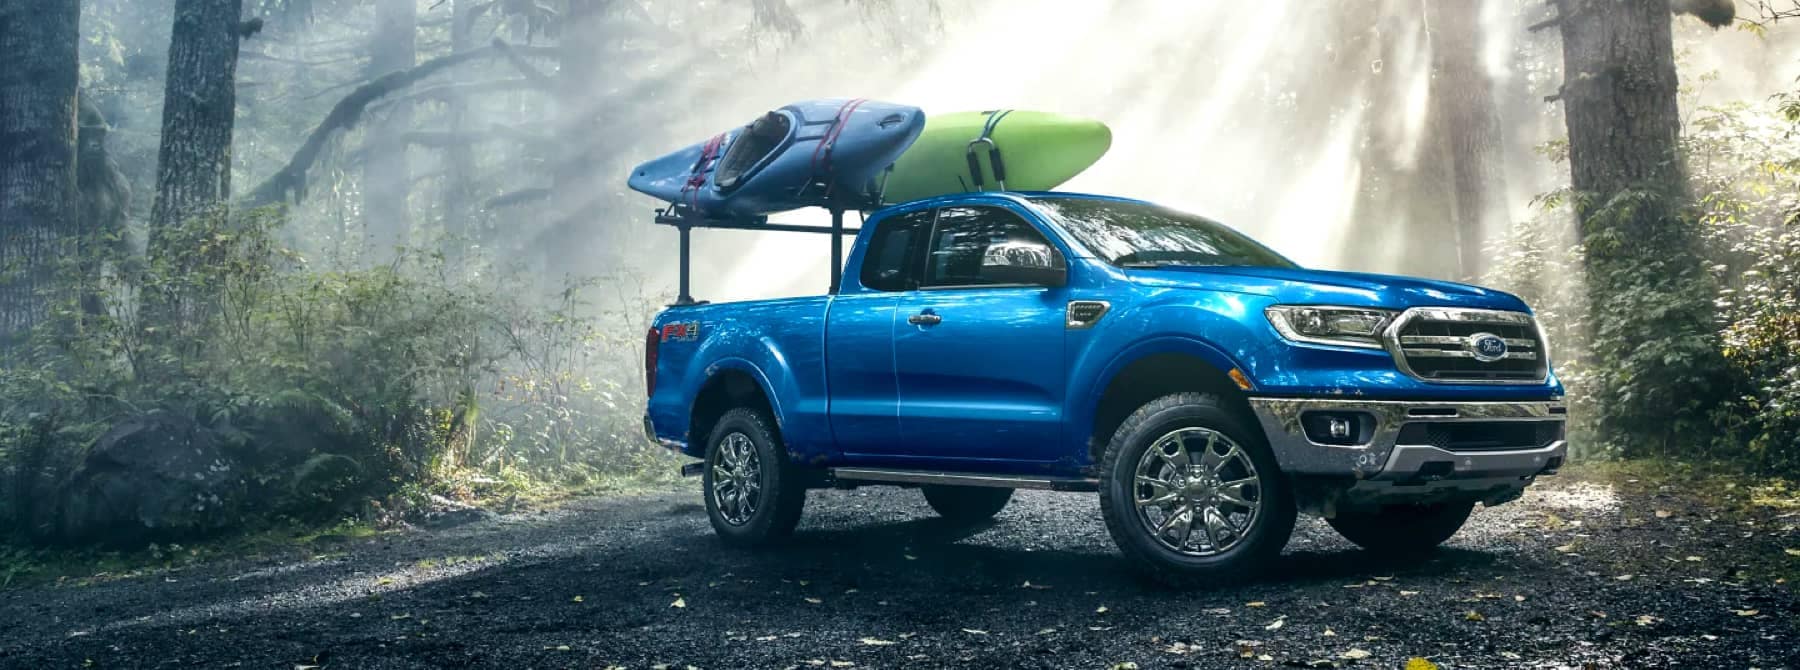 Truck with kayaks